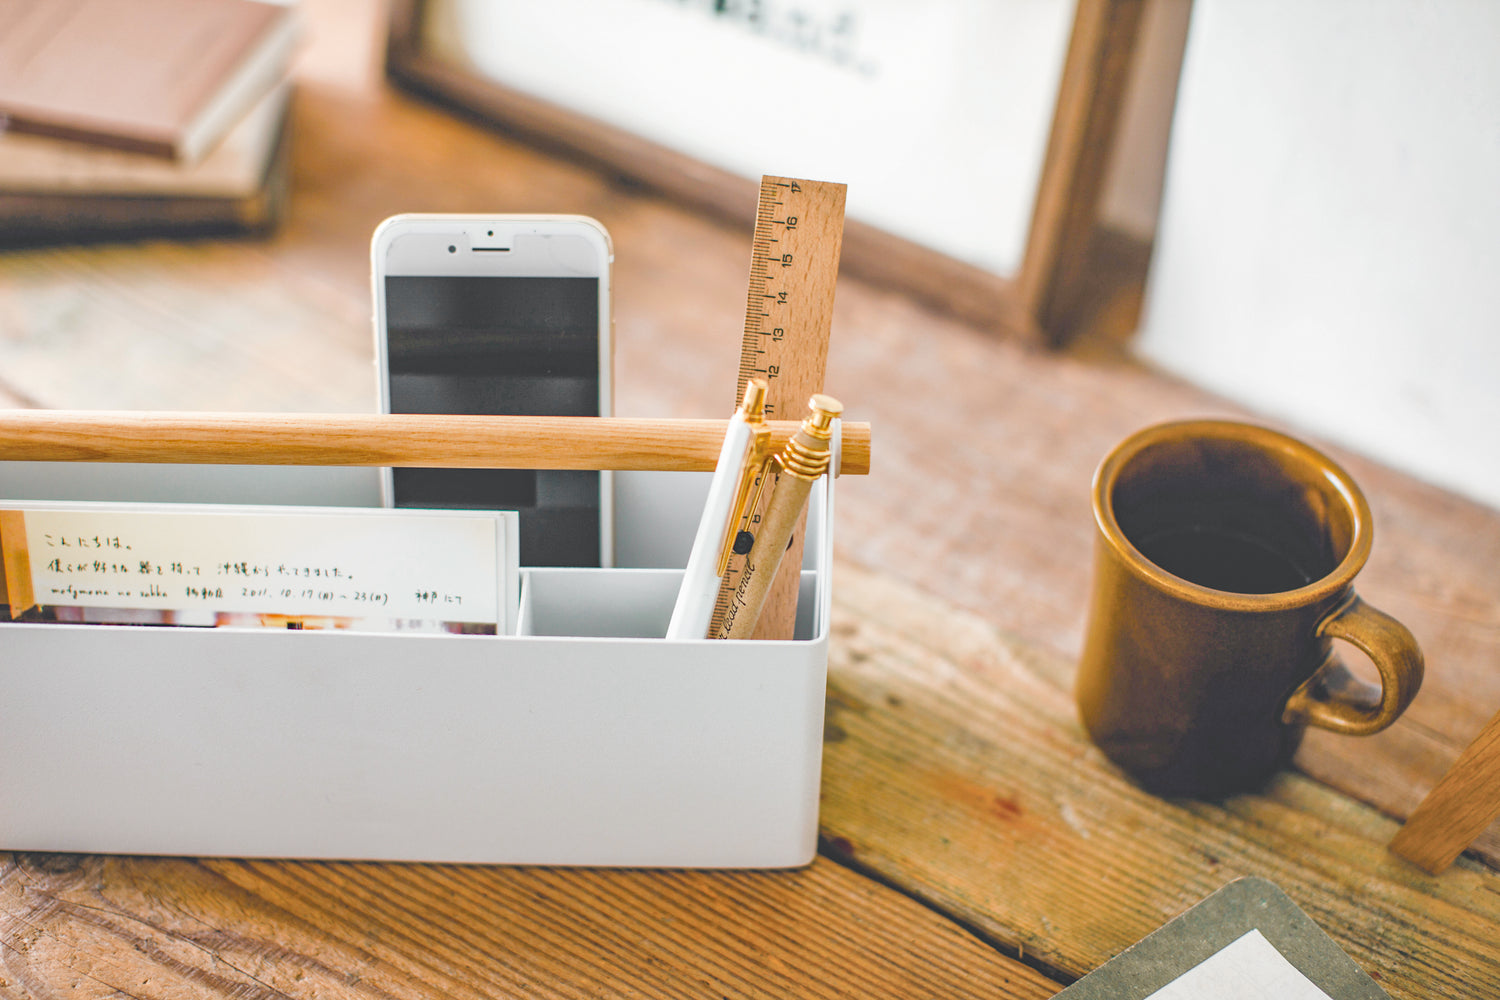 View 12 - Aerial view of white Desk Organizer holding ruler, pens and phone on counter by Yamazaki Home.